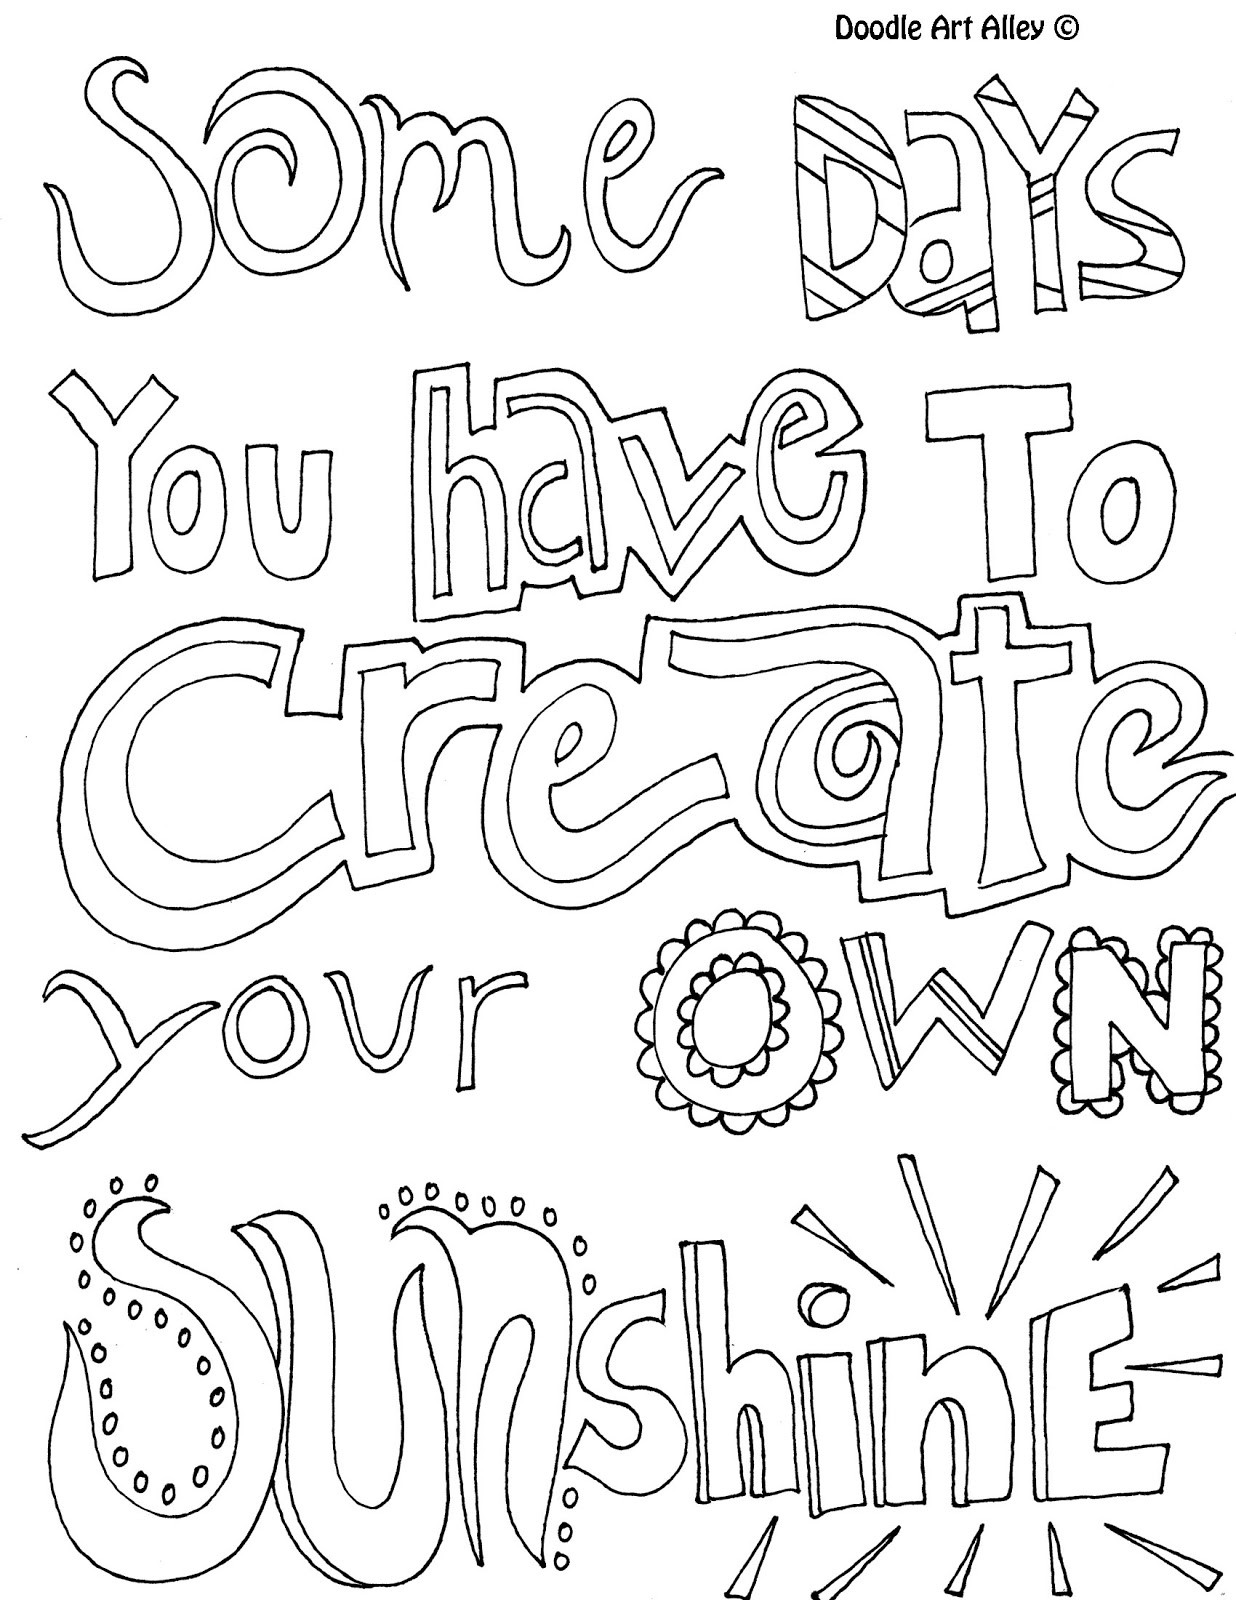 Quote Coloring Pages For Kids
 Positive Quotes Coloring Pages QuotesGram